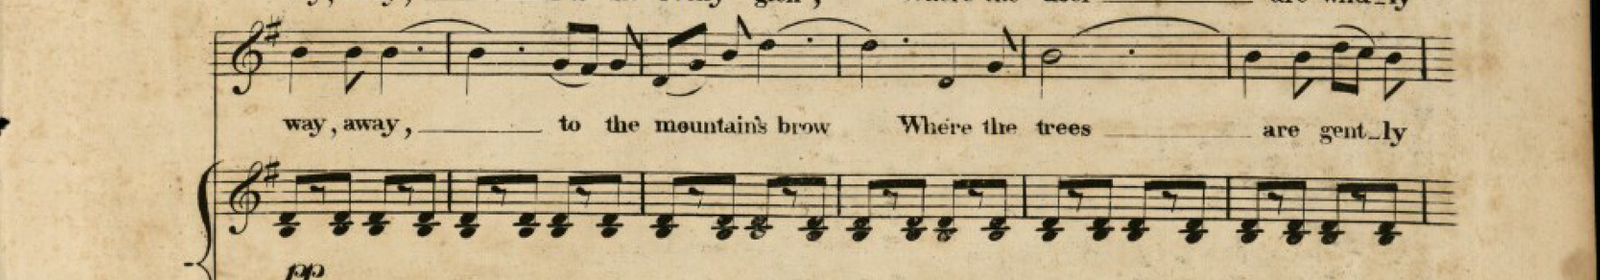 A musical score with words referring to trees and mountains